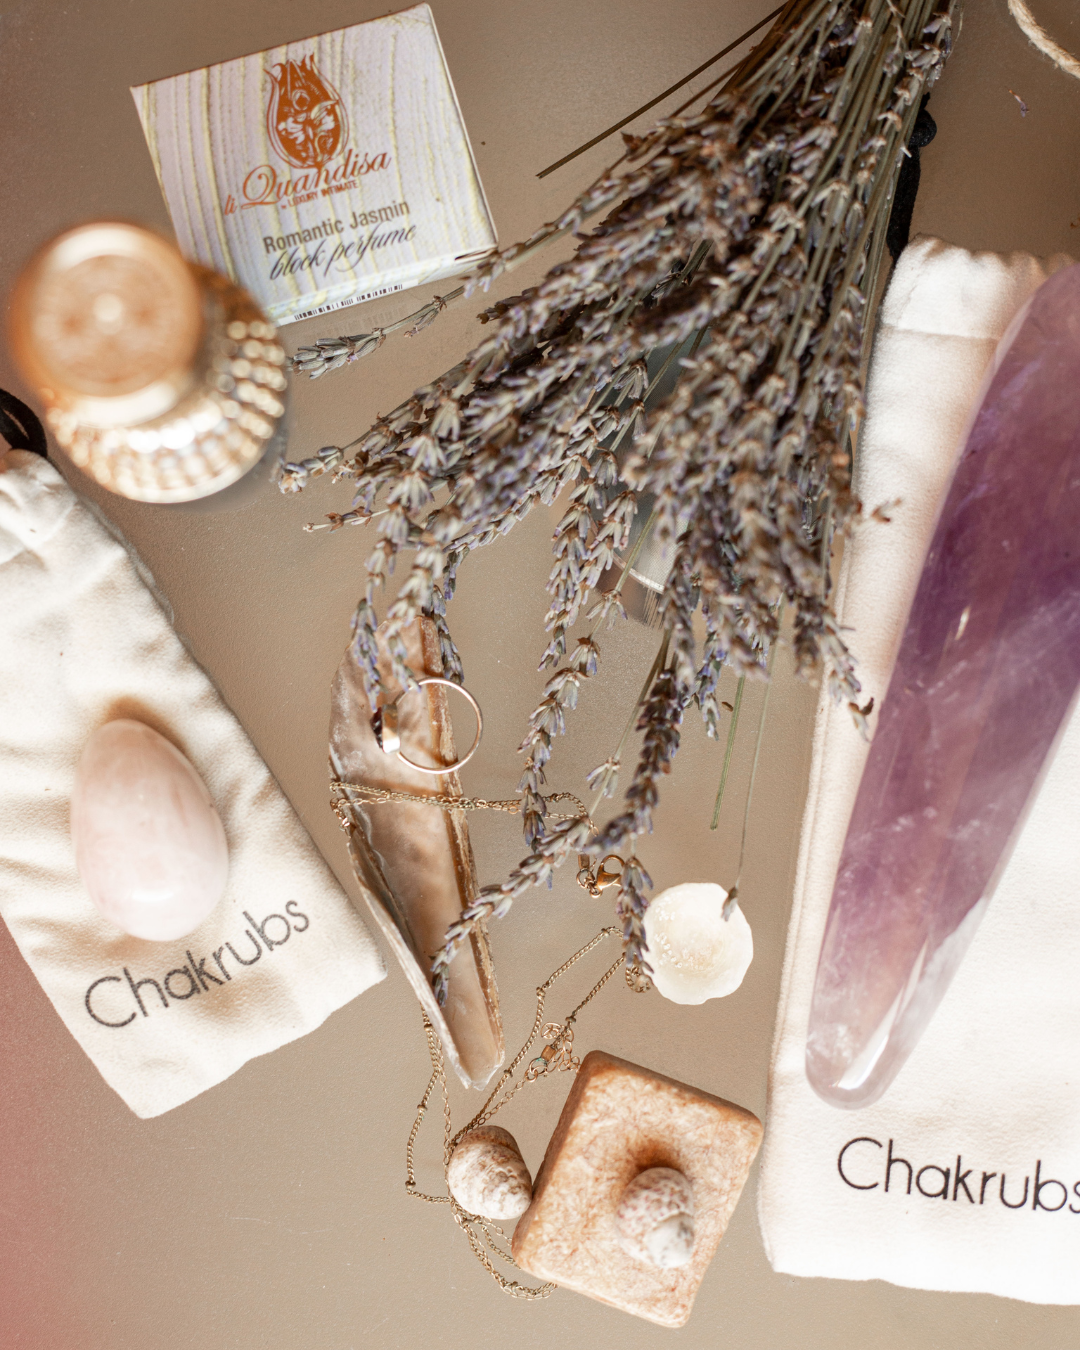 How to Energetically Cleanse Your Chakrub